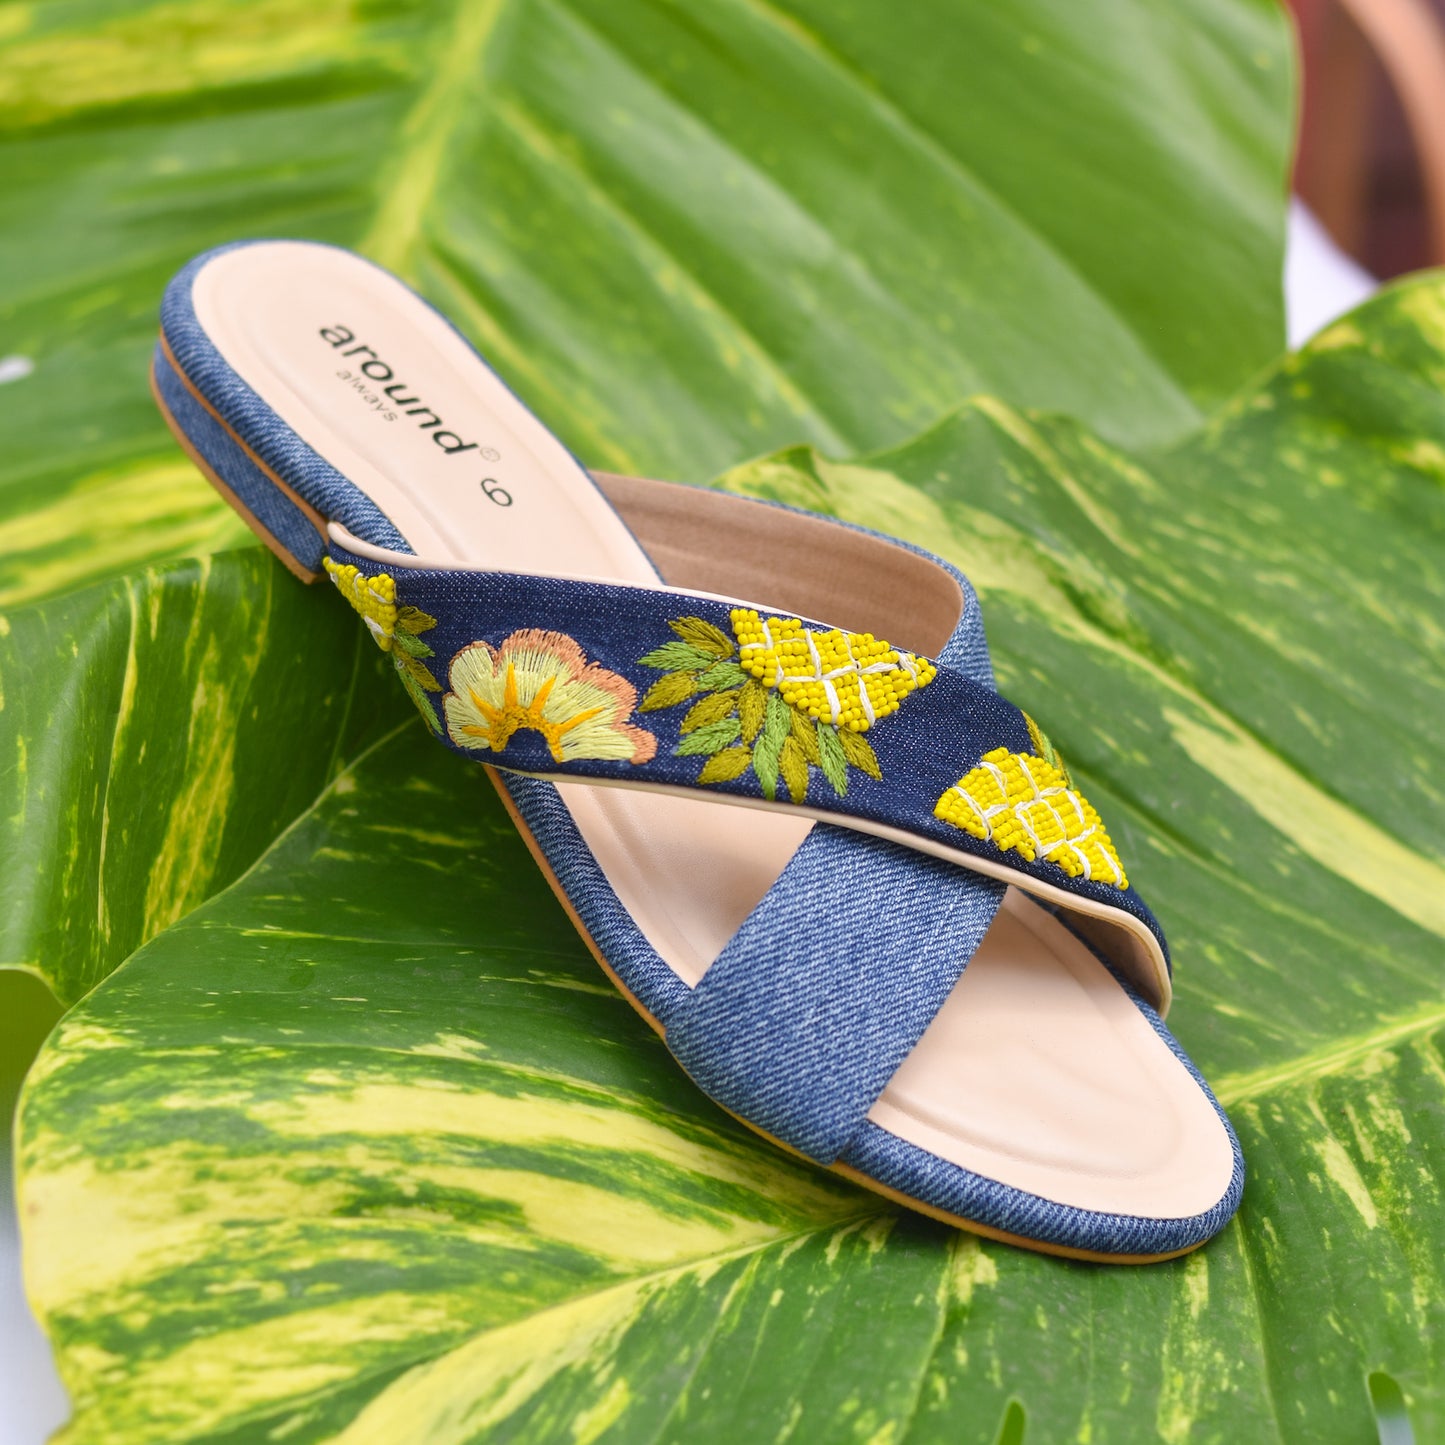 Casual sliders in flats for women with stylish embroidery 